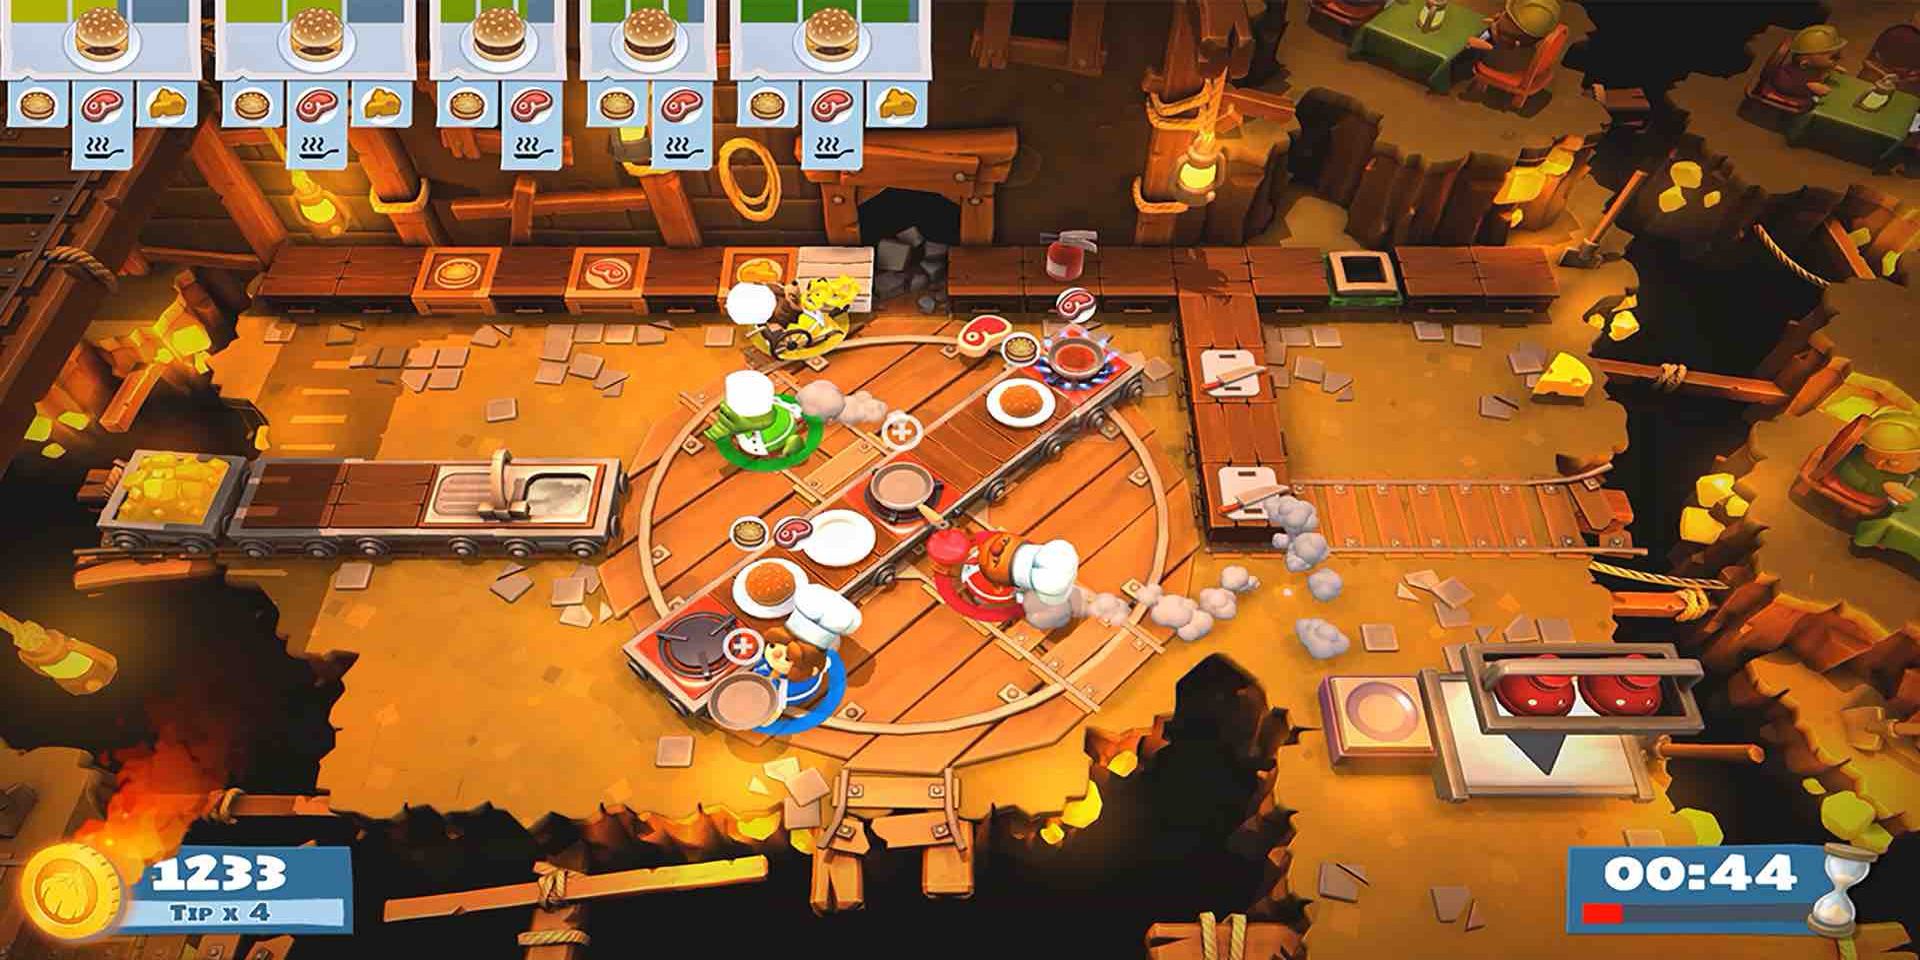 A screenshot of the video game Overcooked 2 on Nintendo Switch.